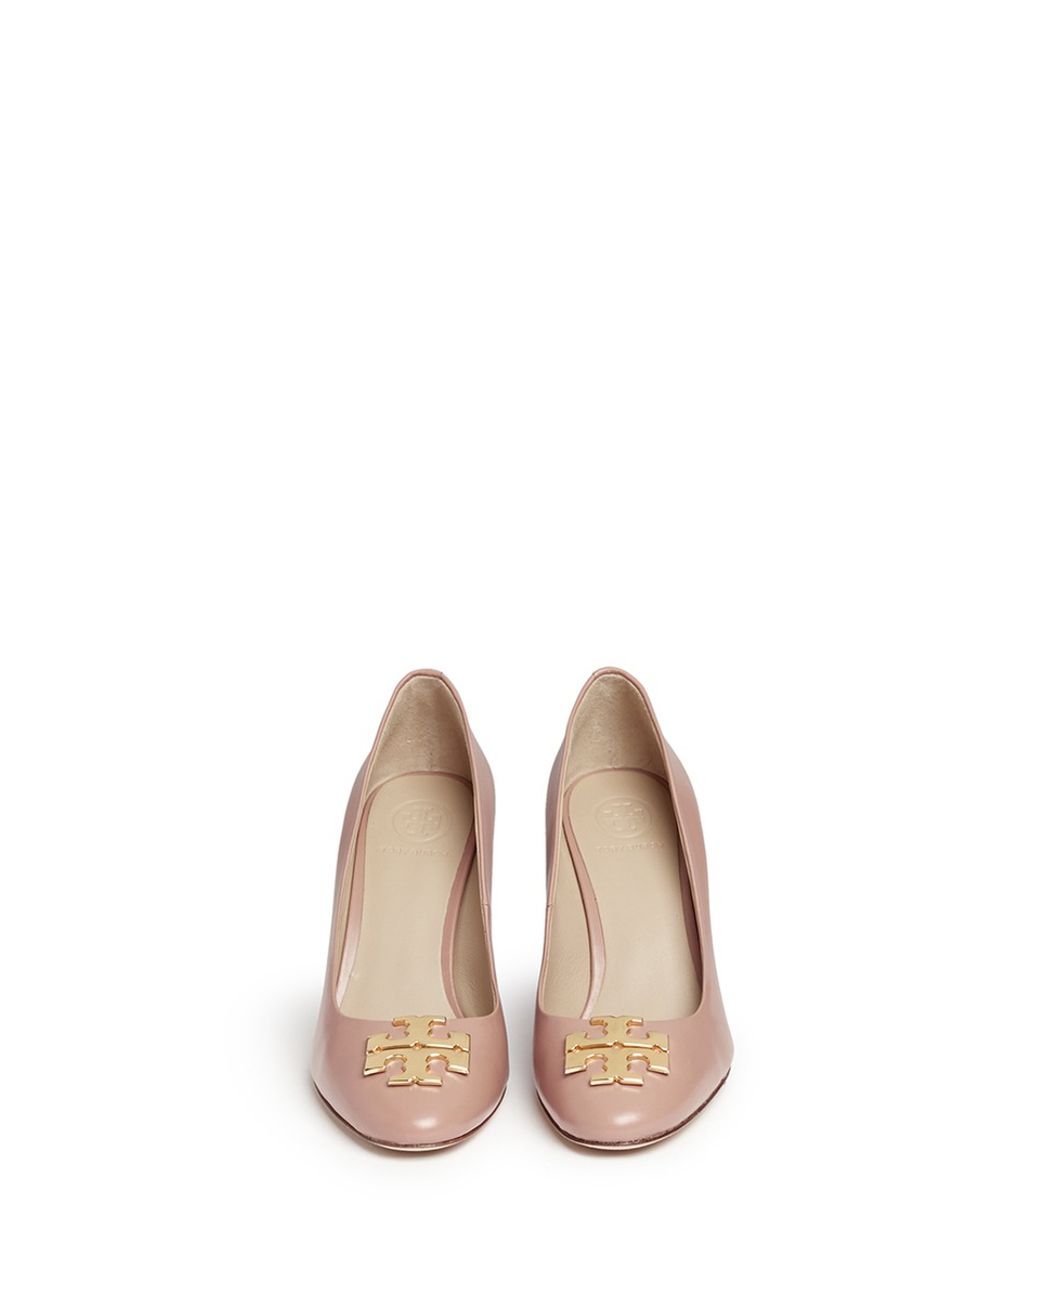 Tory Burch 'raleigh' Leather Wedge Pumps in Pink | Lyst